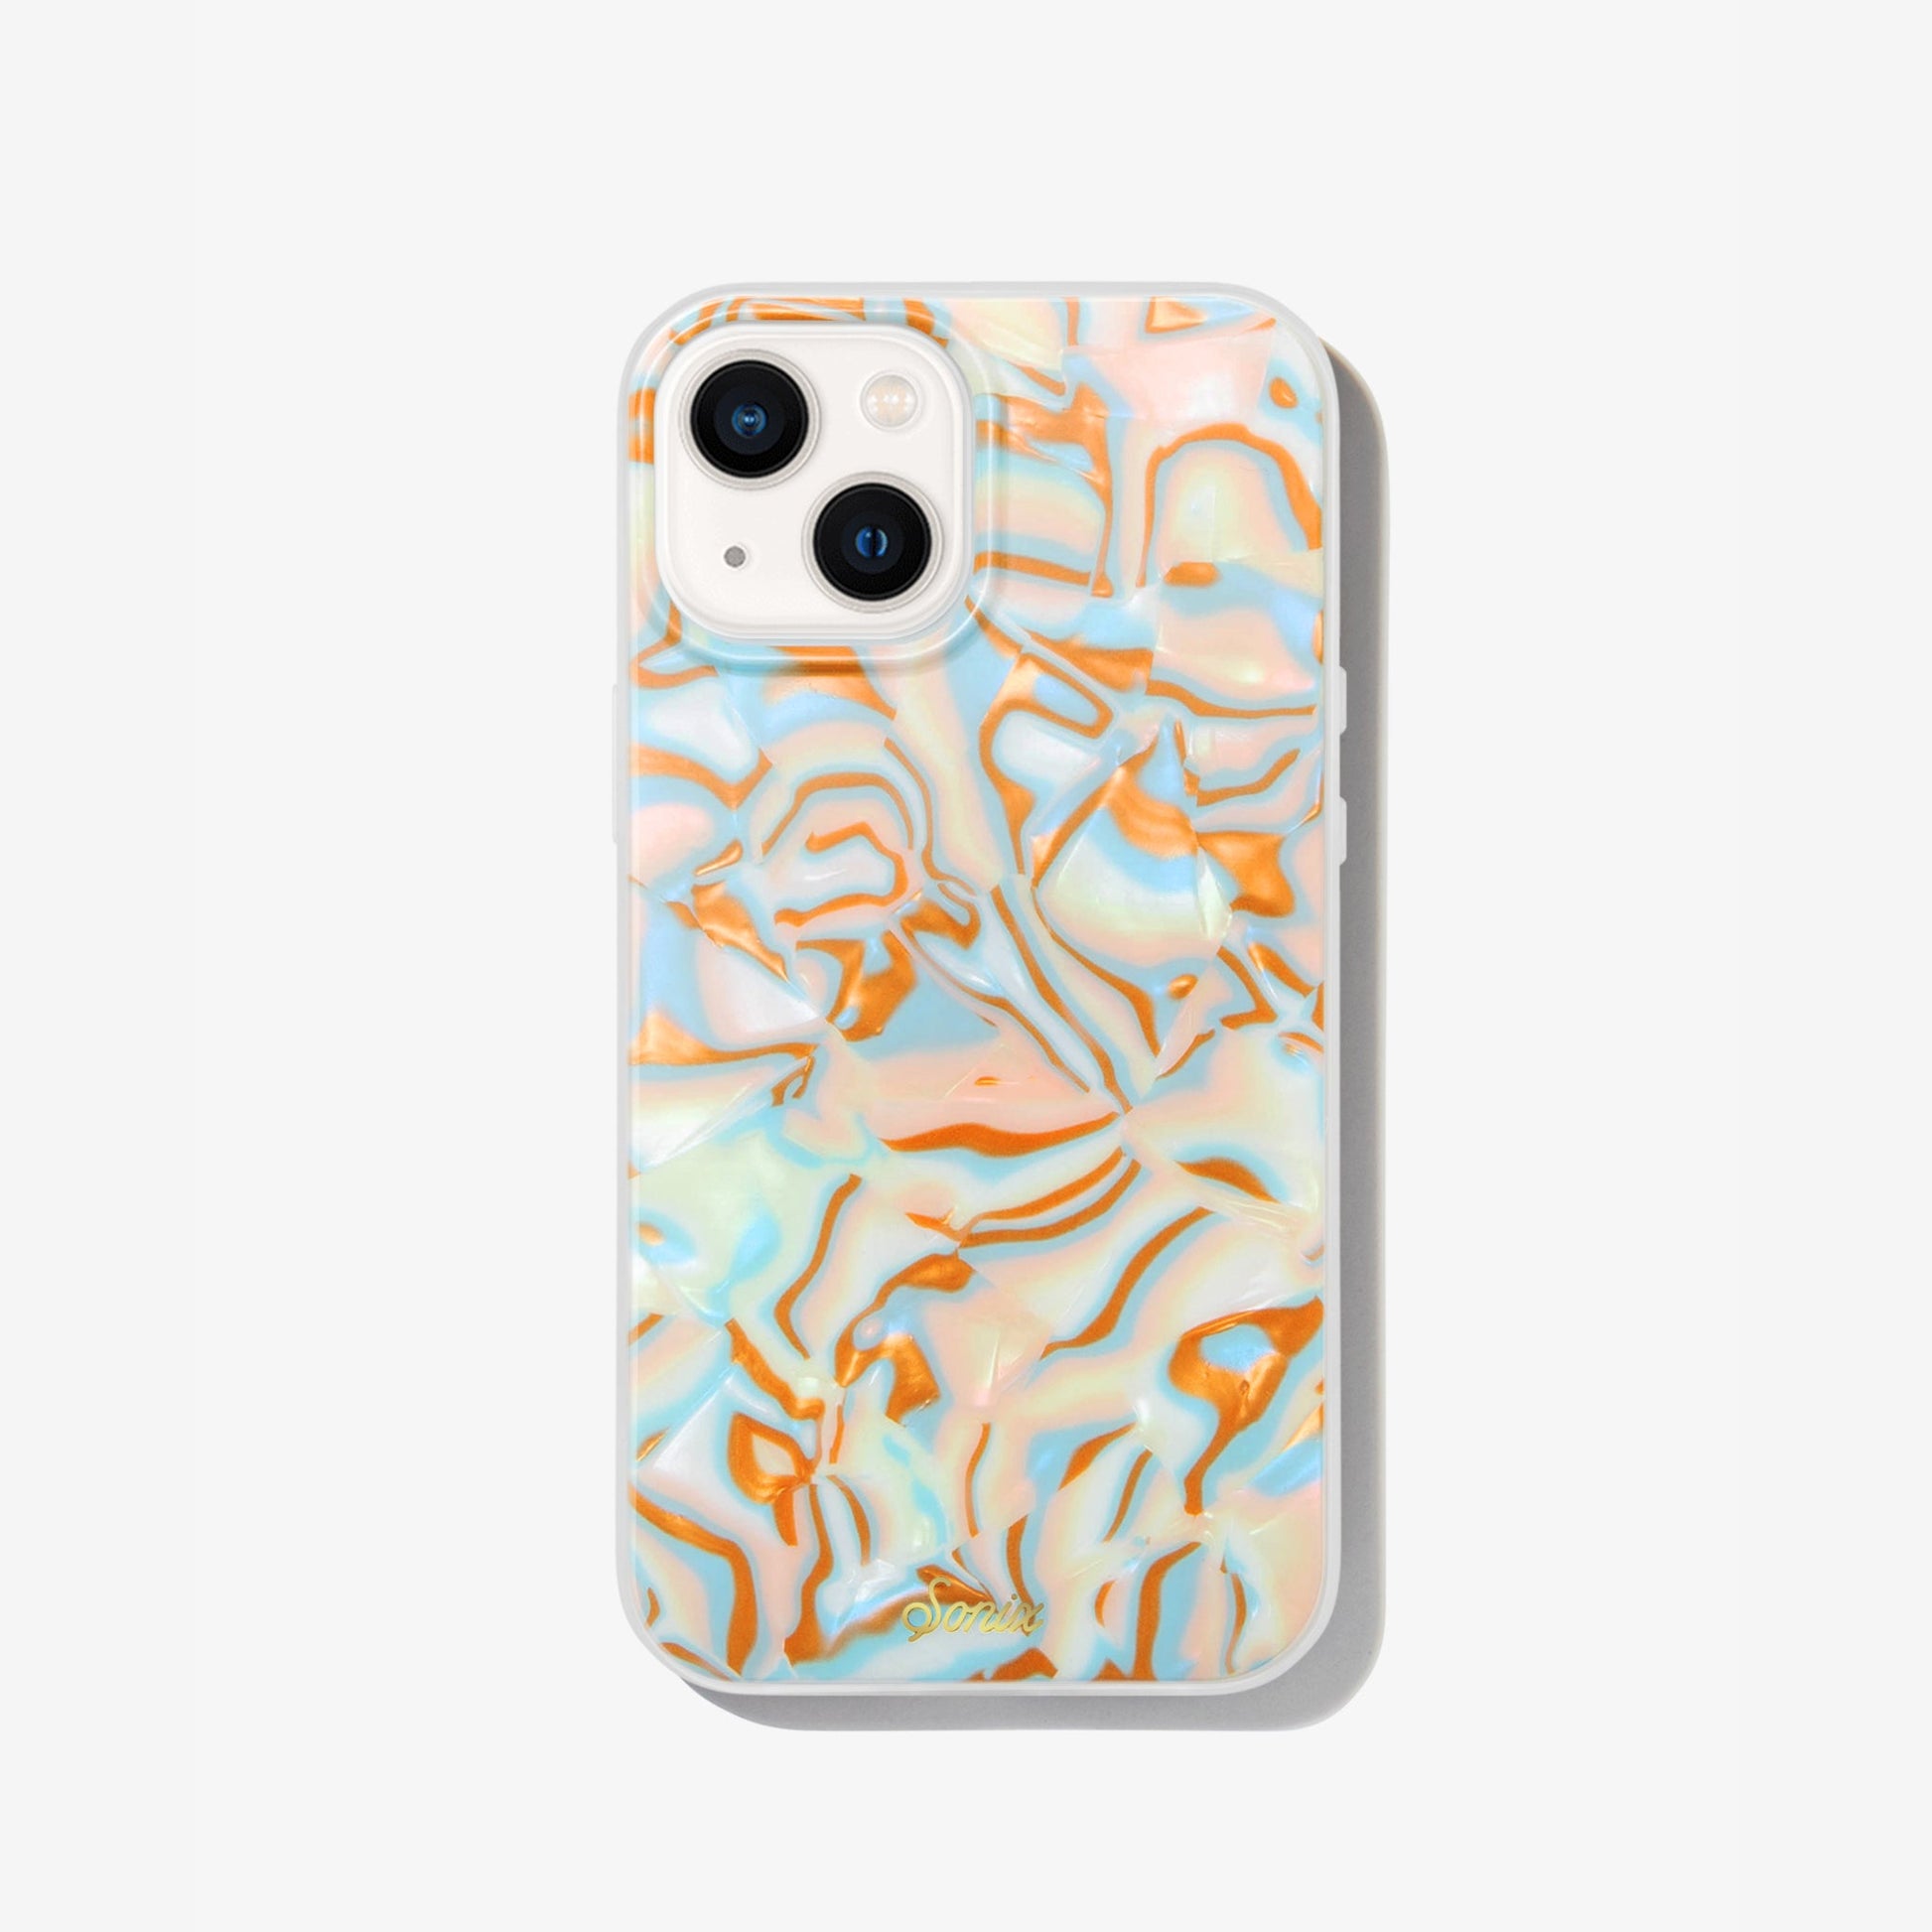 metallic oranges, blues, and cream colors in a wavy 70's pattern shown on an iphone 13